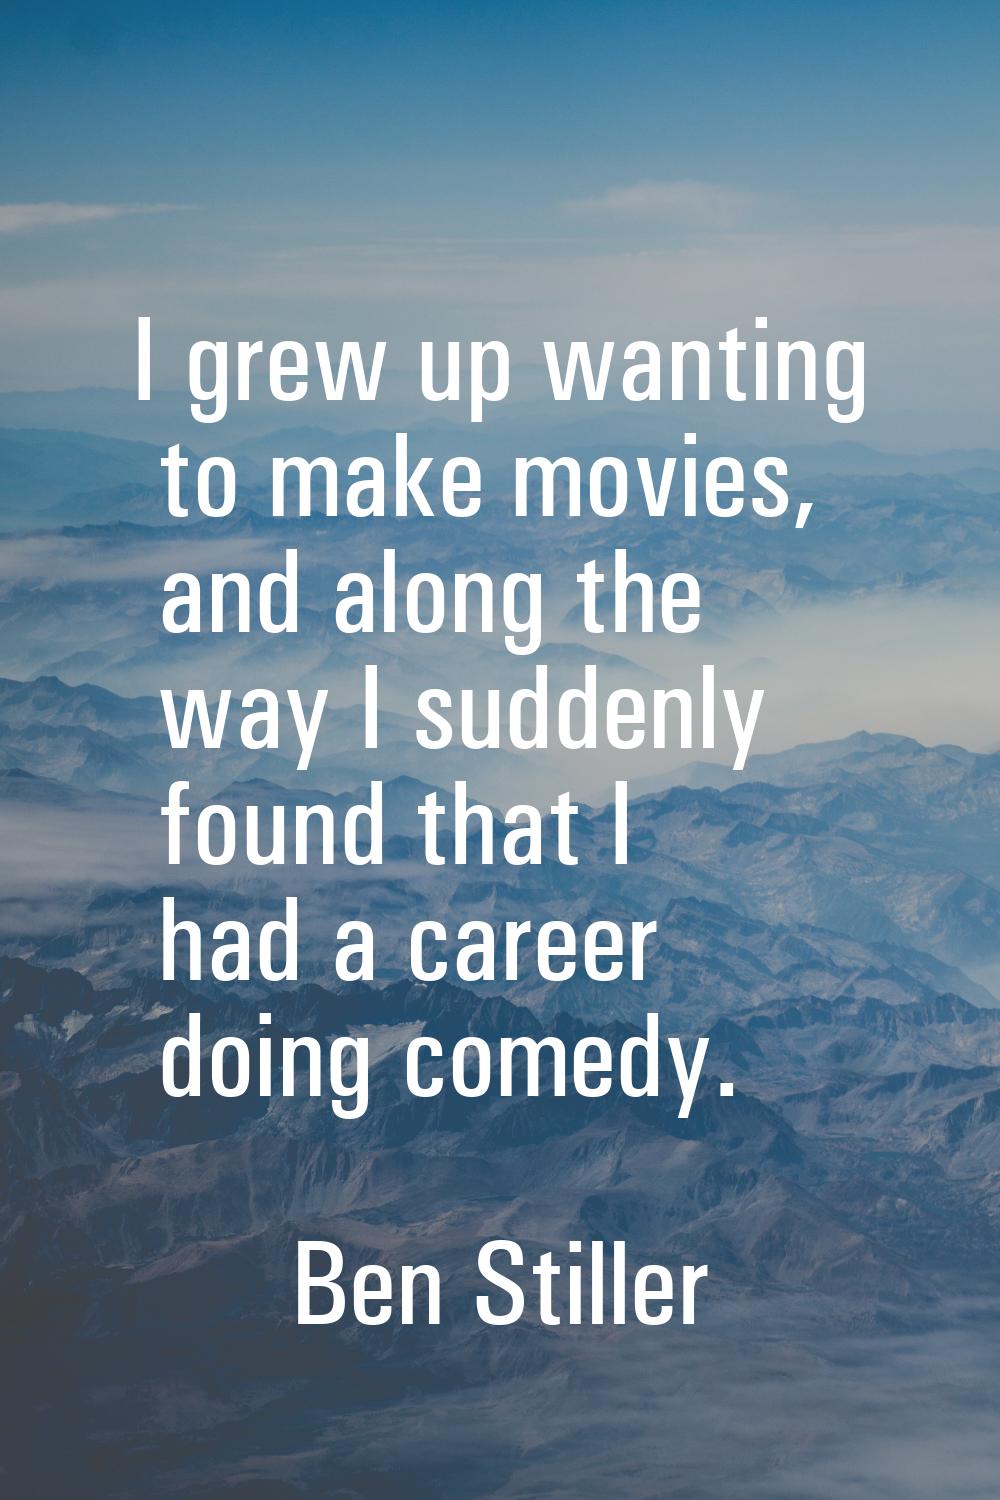 I grew up wanting to make movies, and along the way I suddenly found that I had a career doing come